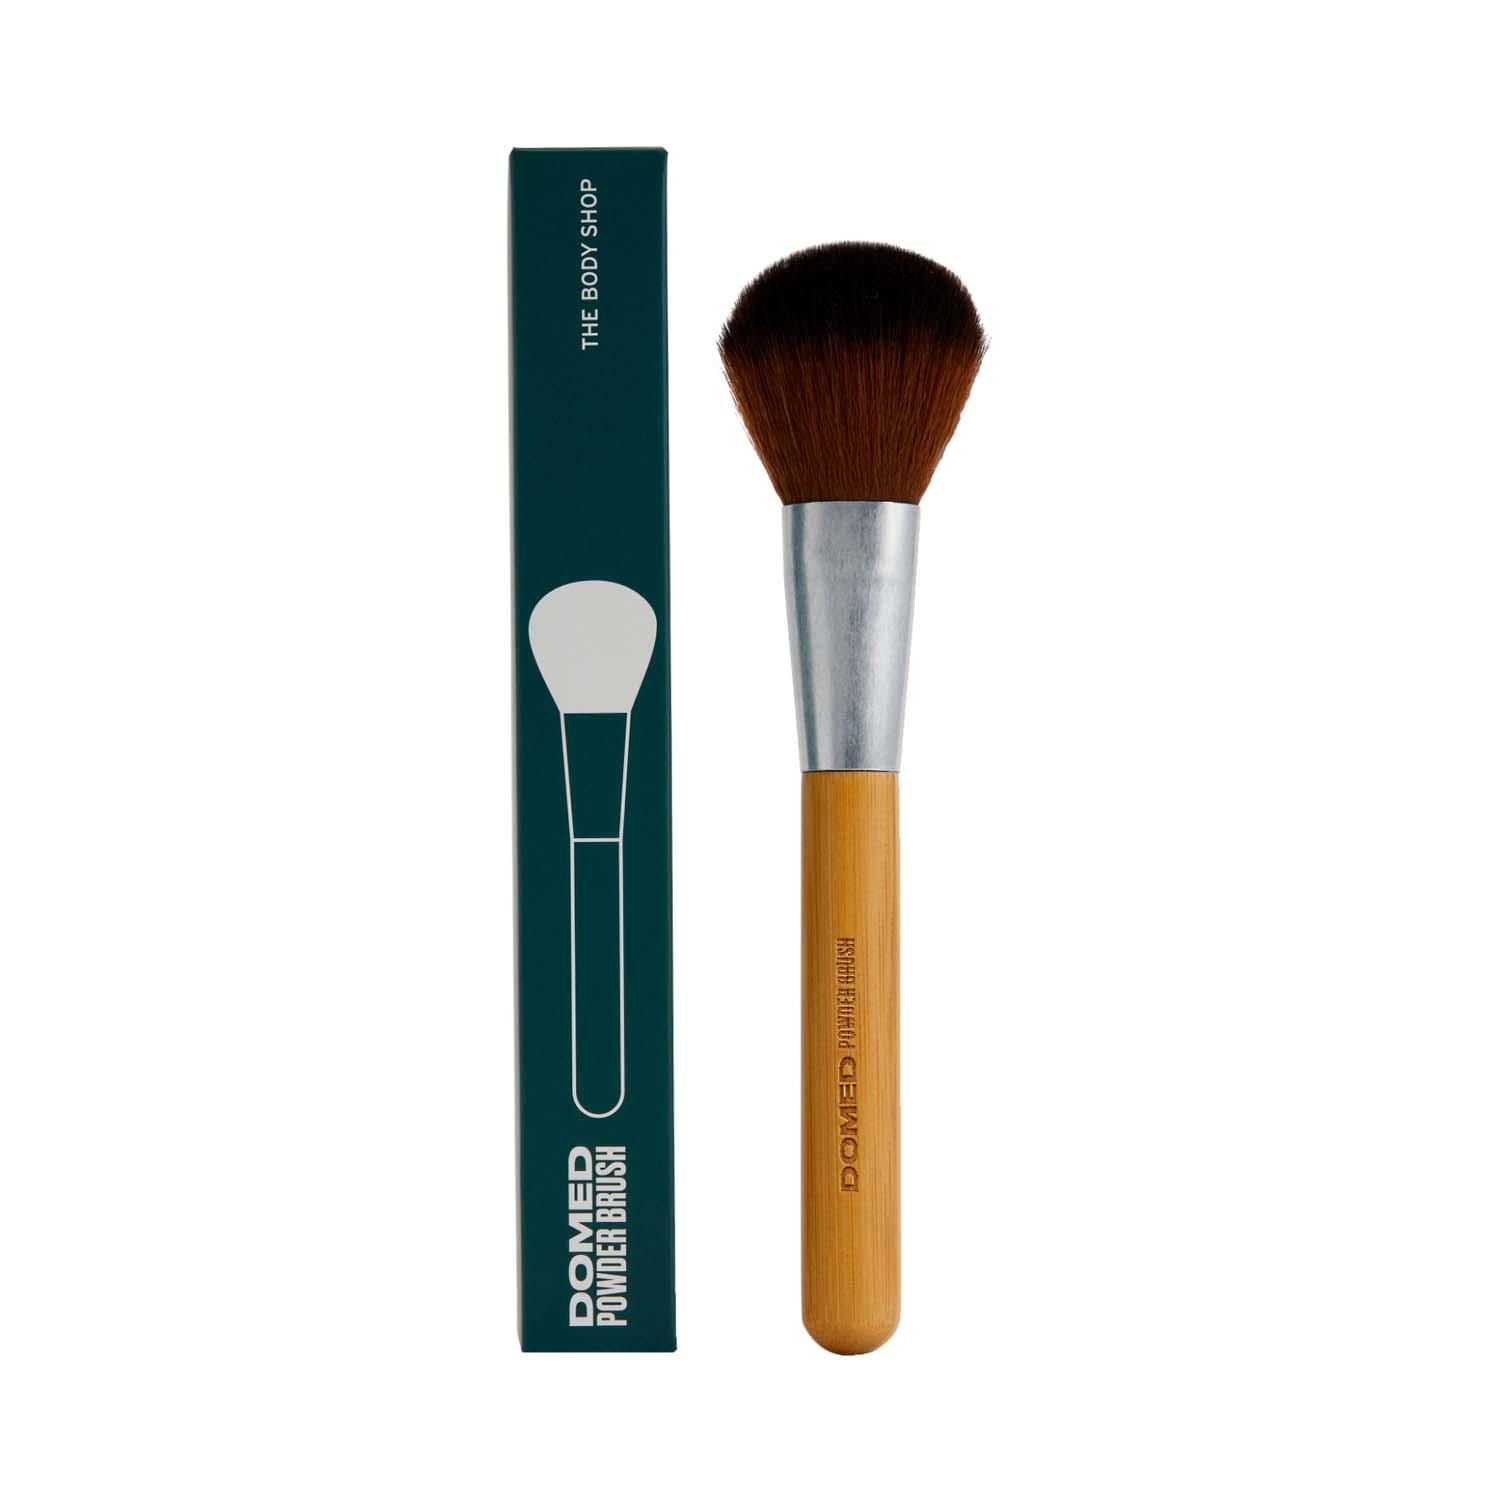 The Body Shop Domed Powder Face Brush